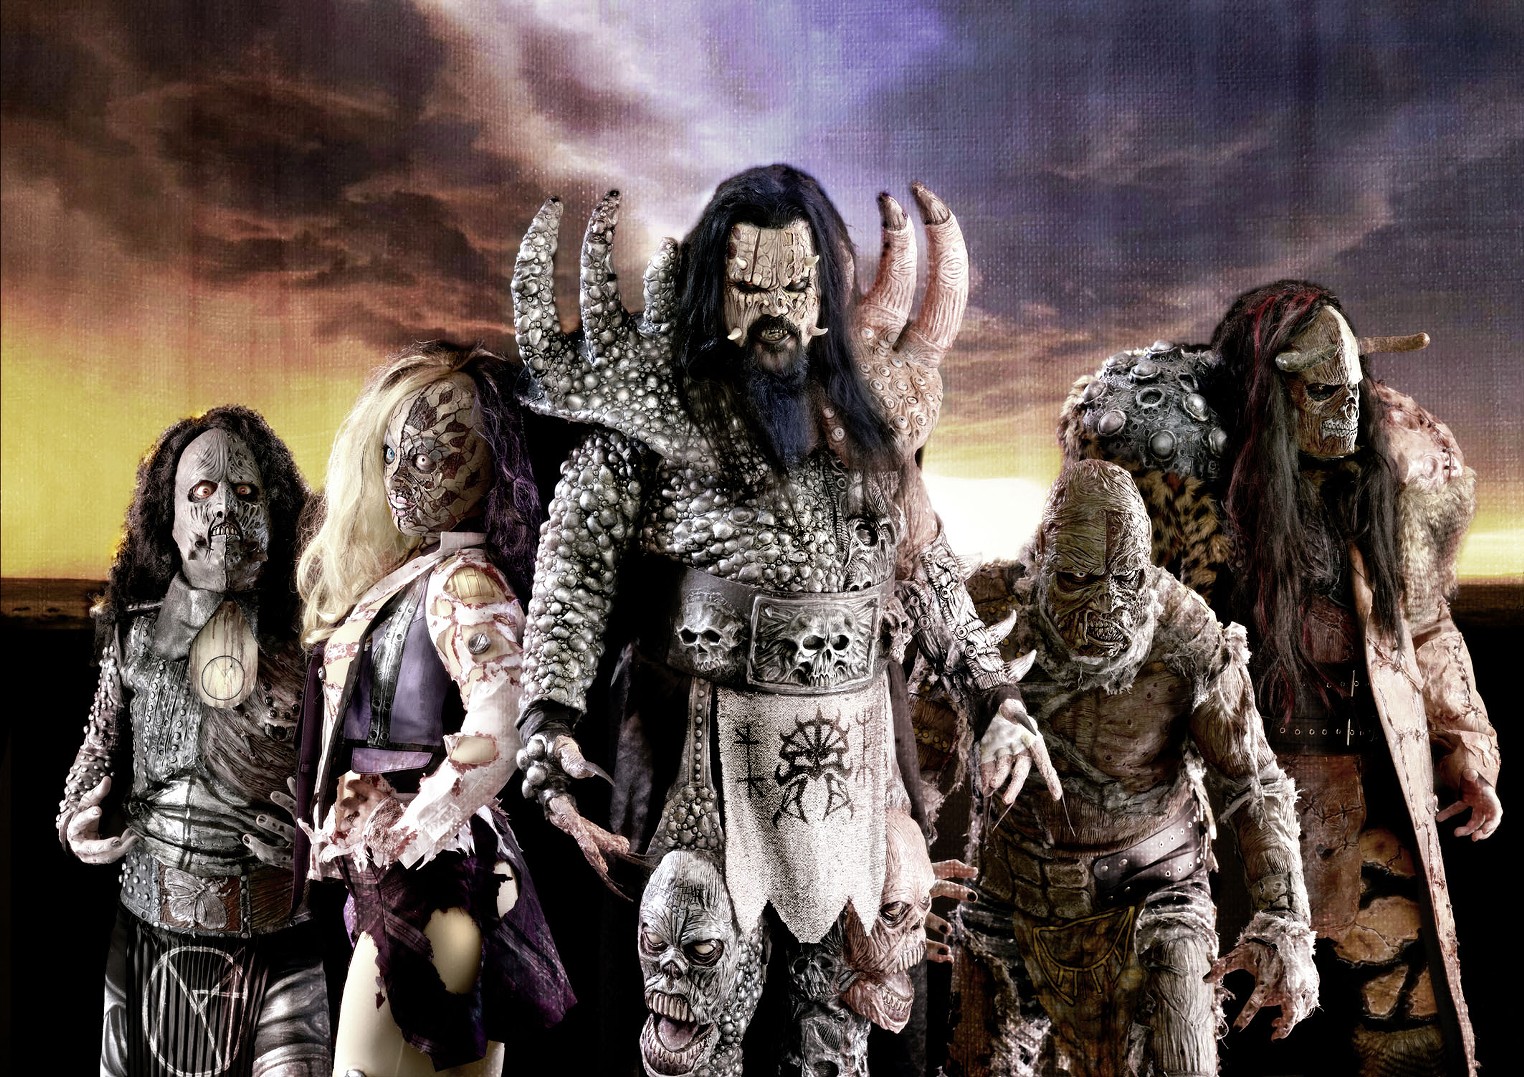 Lordi Rocks in Monster Costumes Evoke Kiss, but Are Much Scarier | Westword